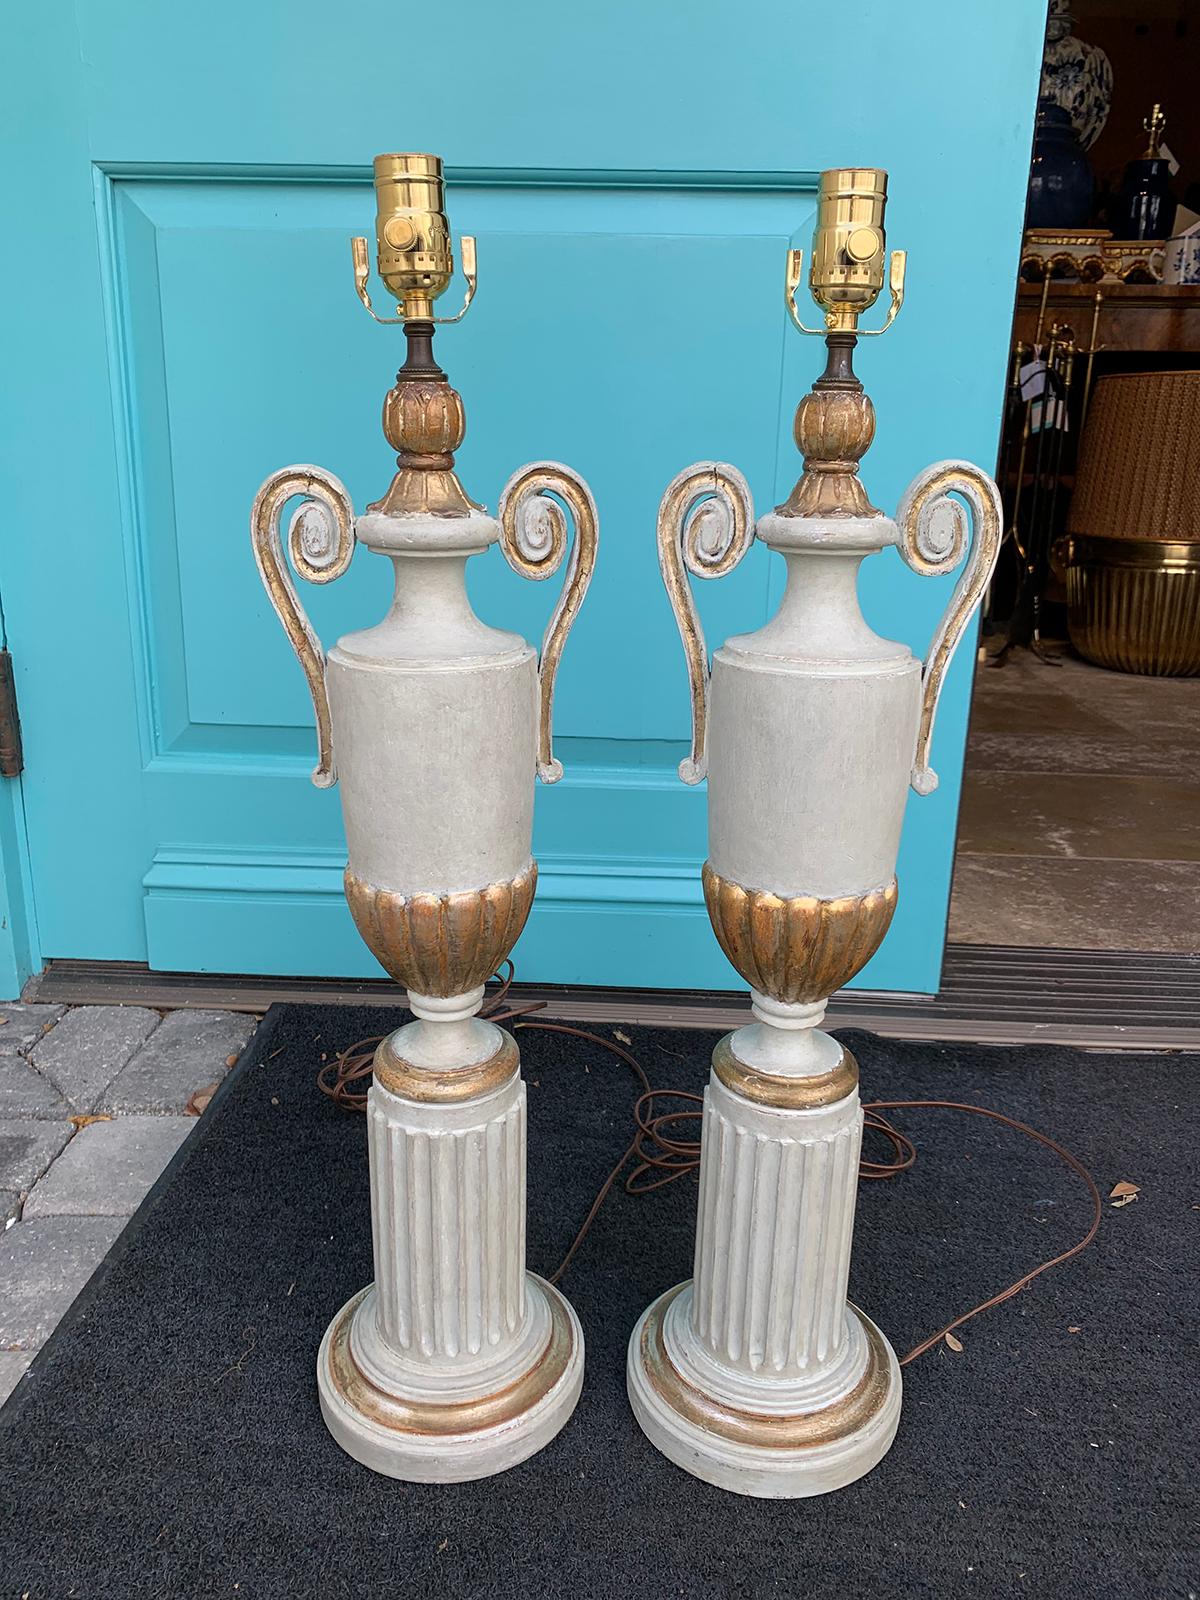 Pair of 20th century Italian neoclassical carved wood urns as lamps with custom finish
Measures: 6.75